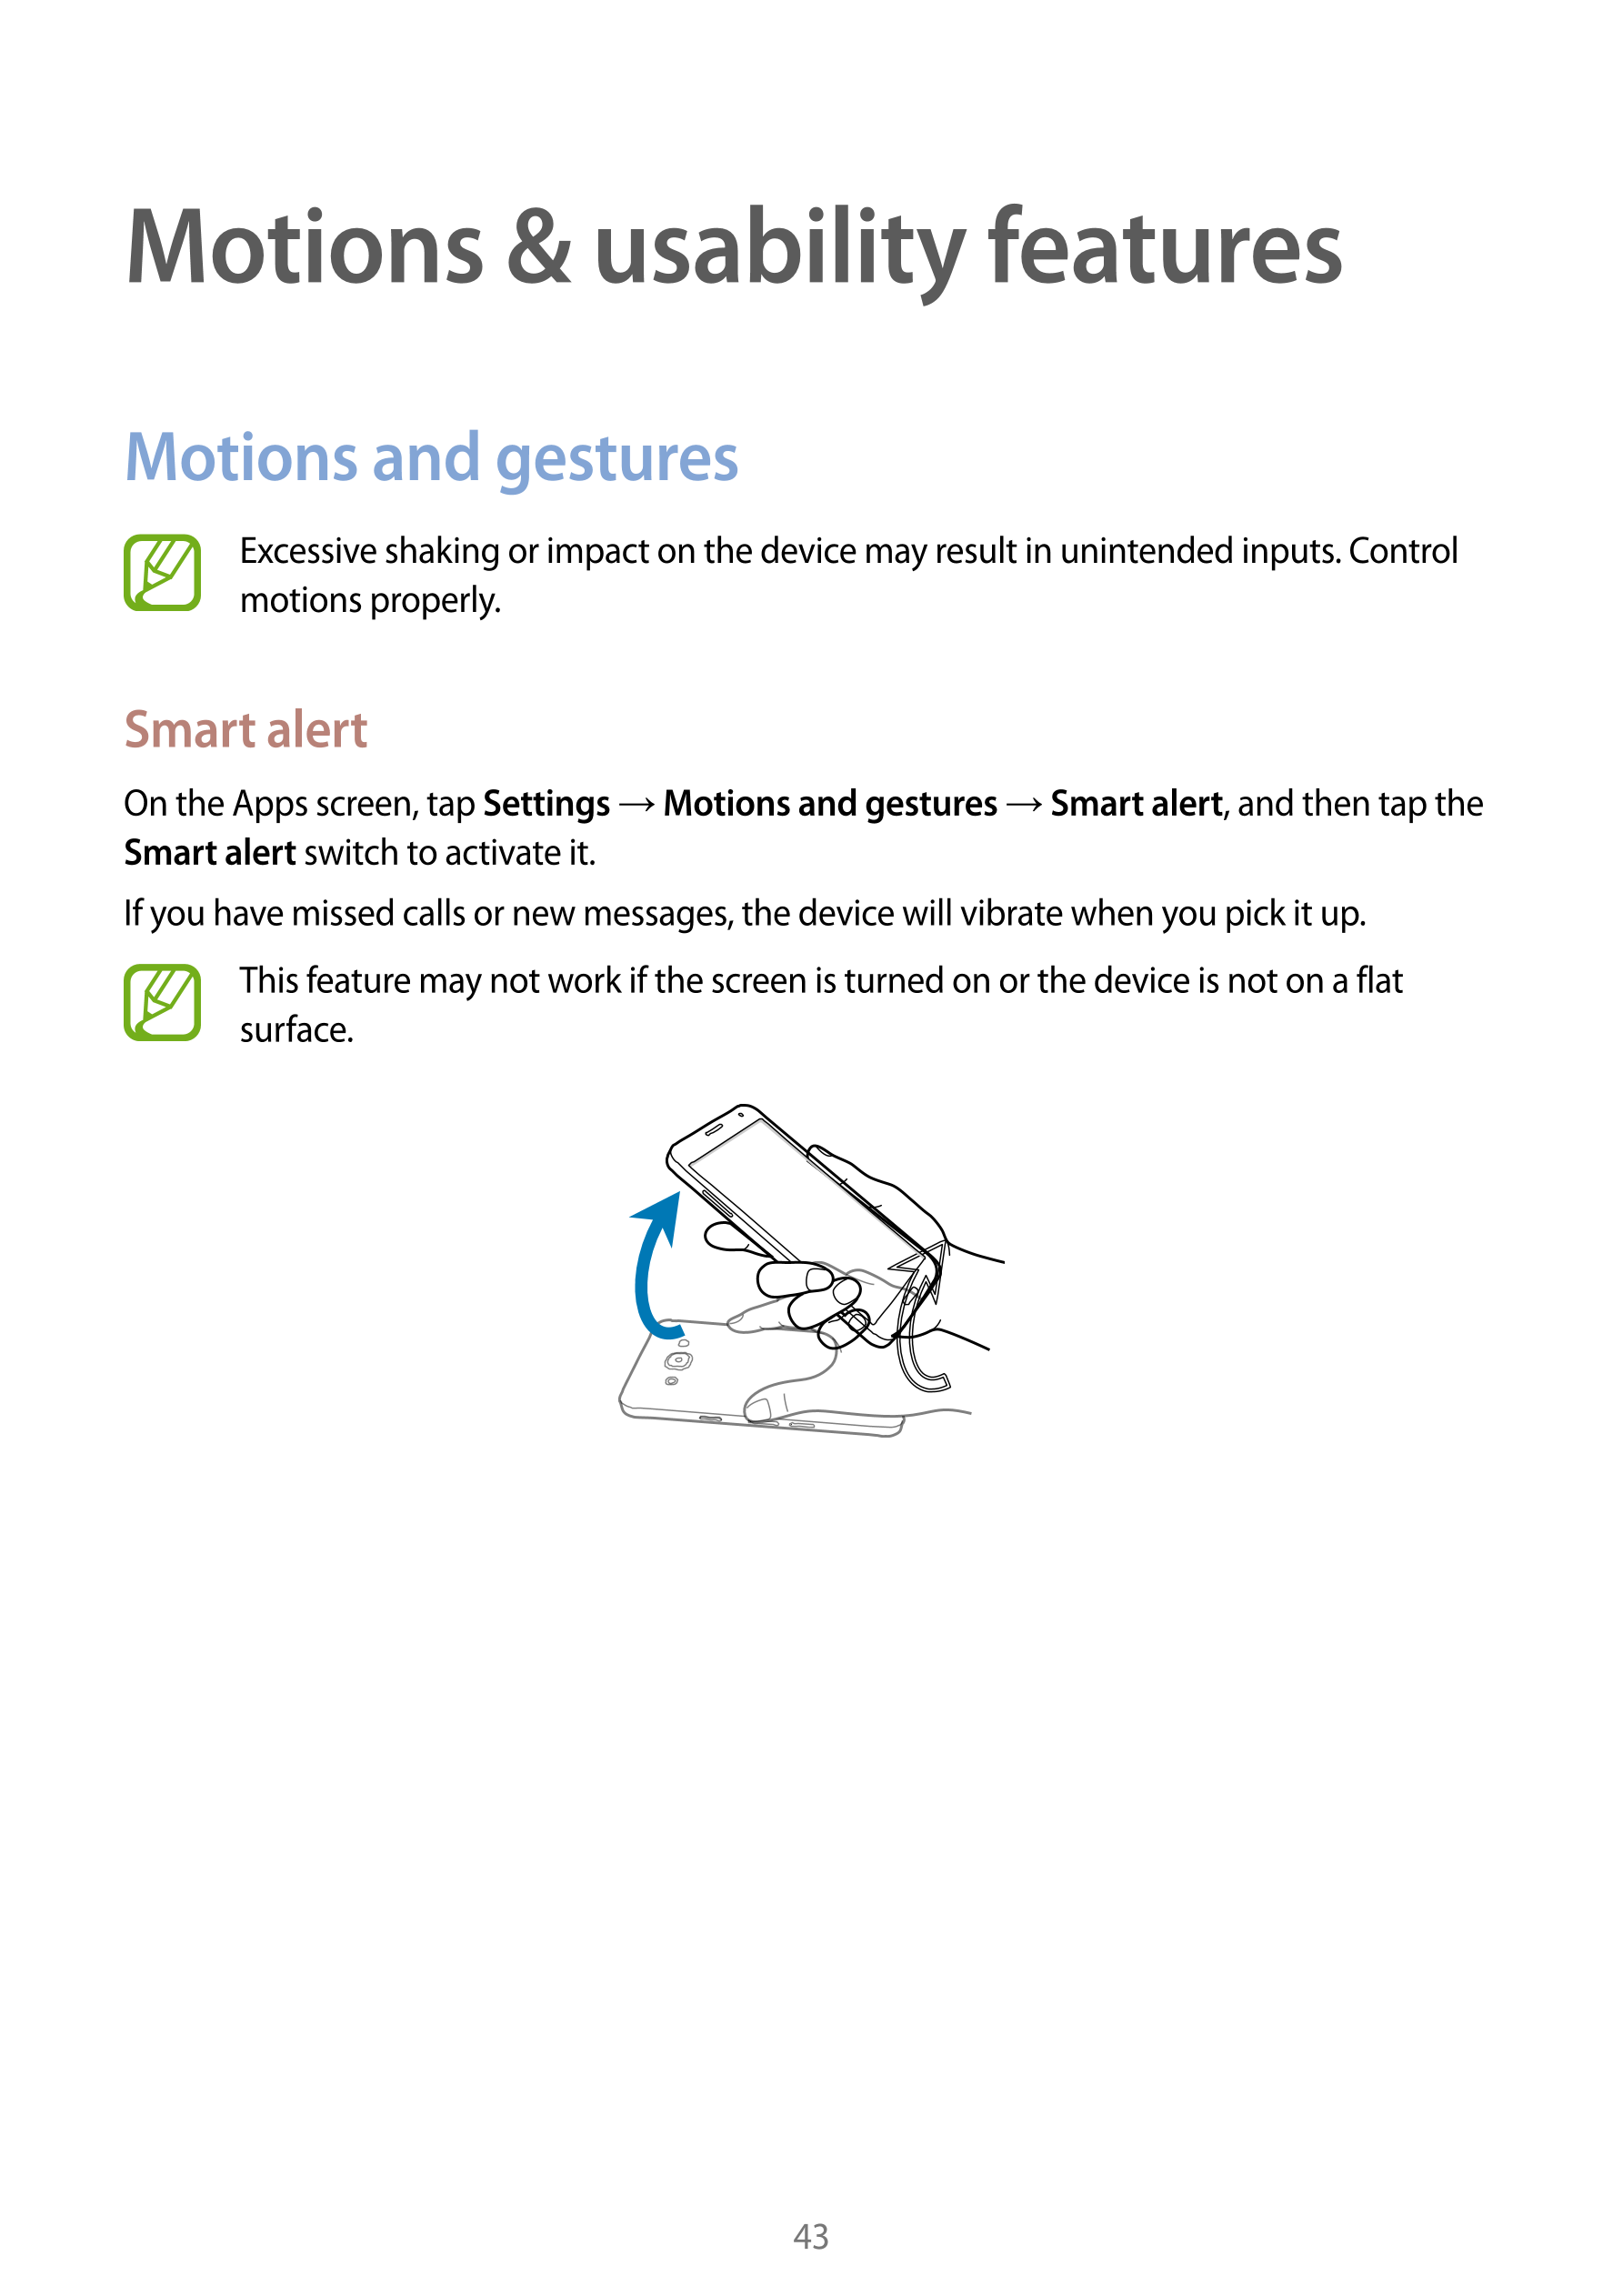 Motions & usability features
Motions and gestures
Excessive shaking or impact on the device may result in unintended inputs. Con